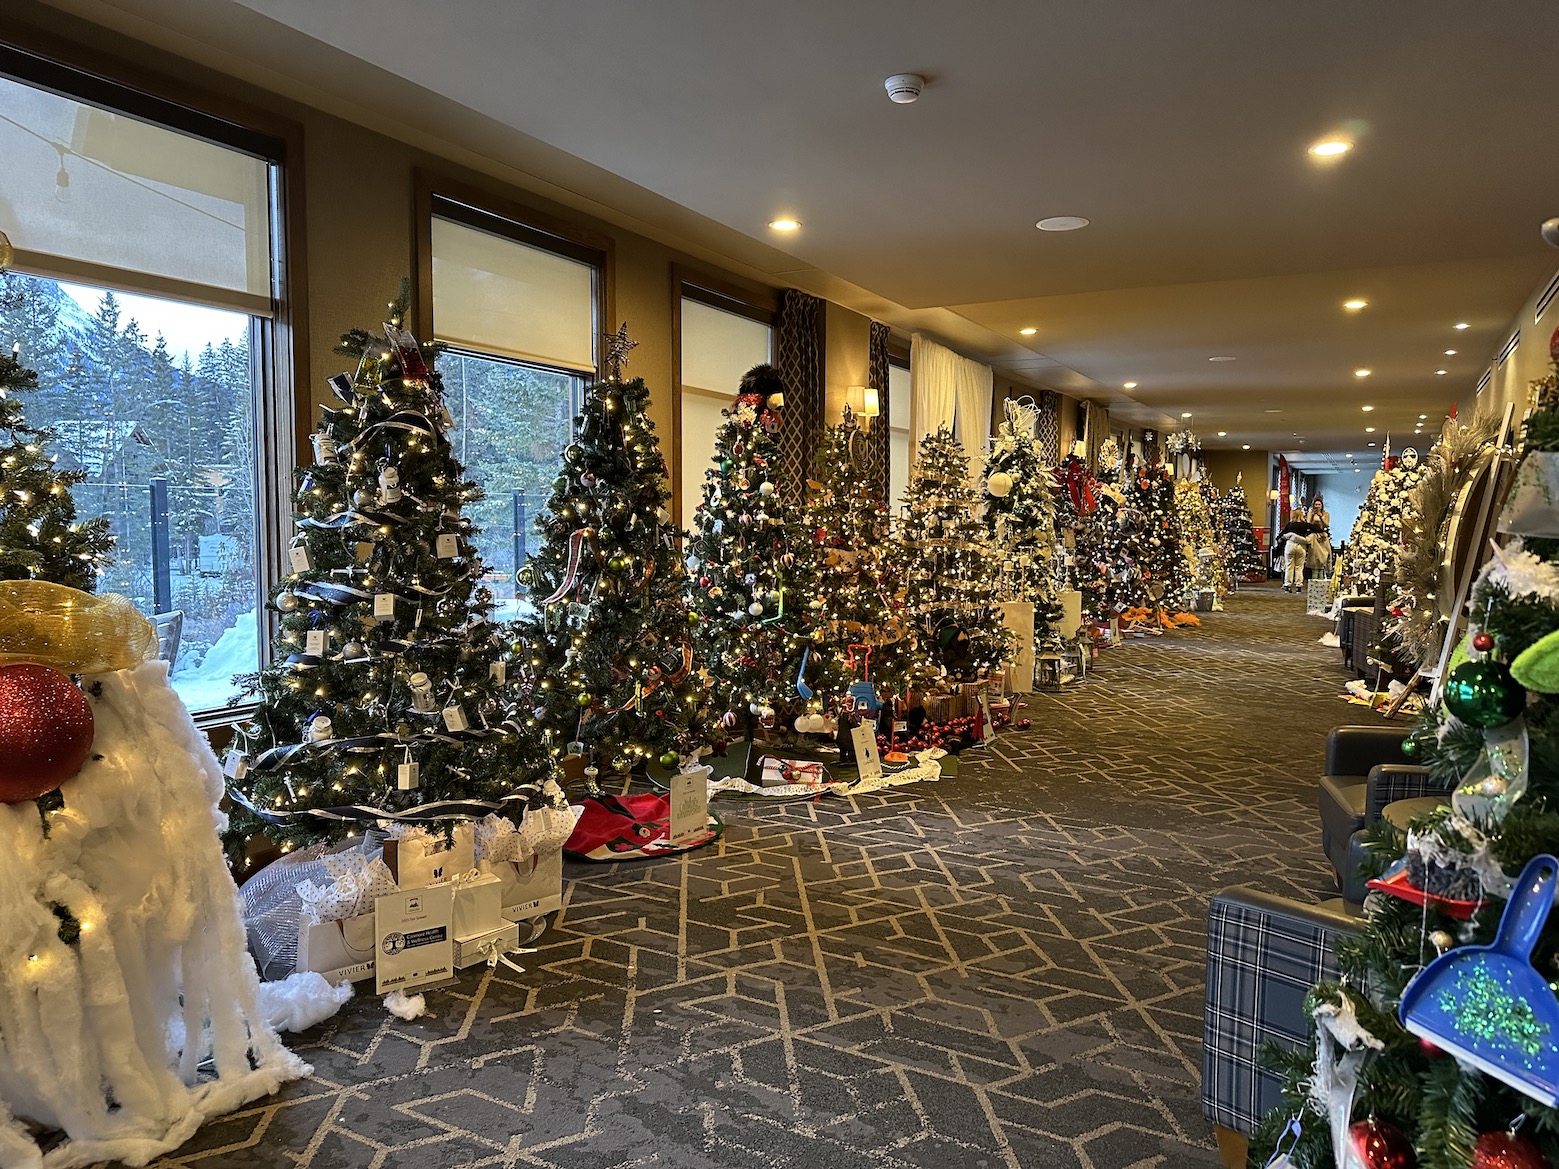 Canmore Festival of Trees